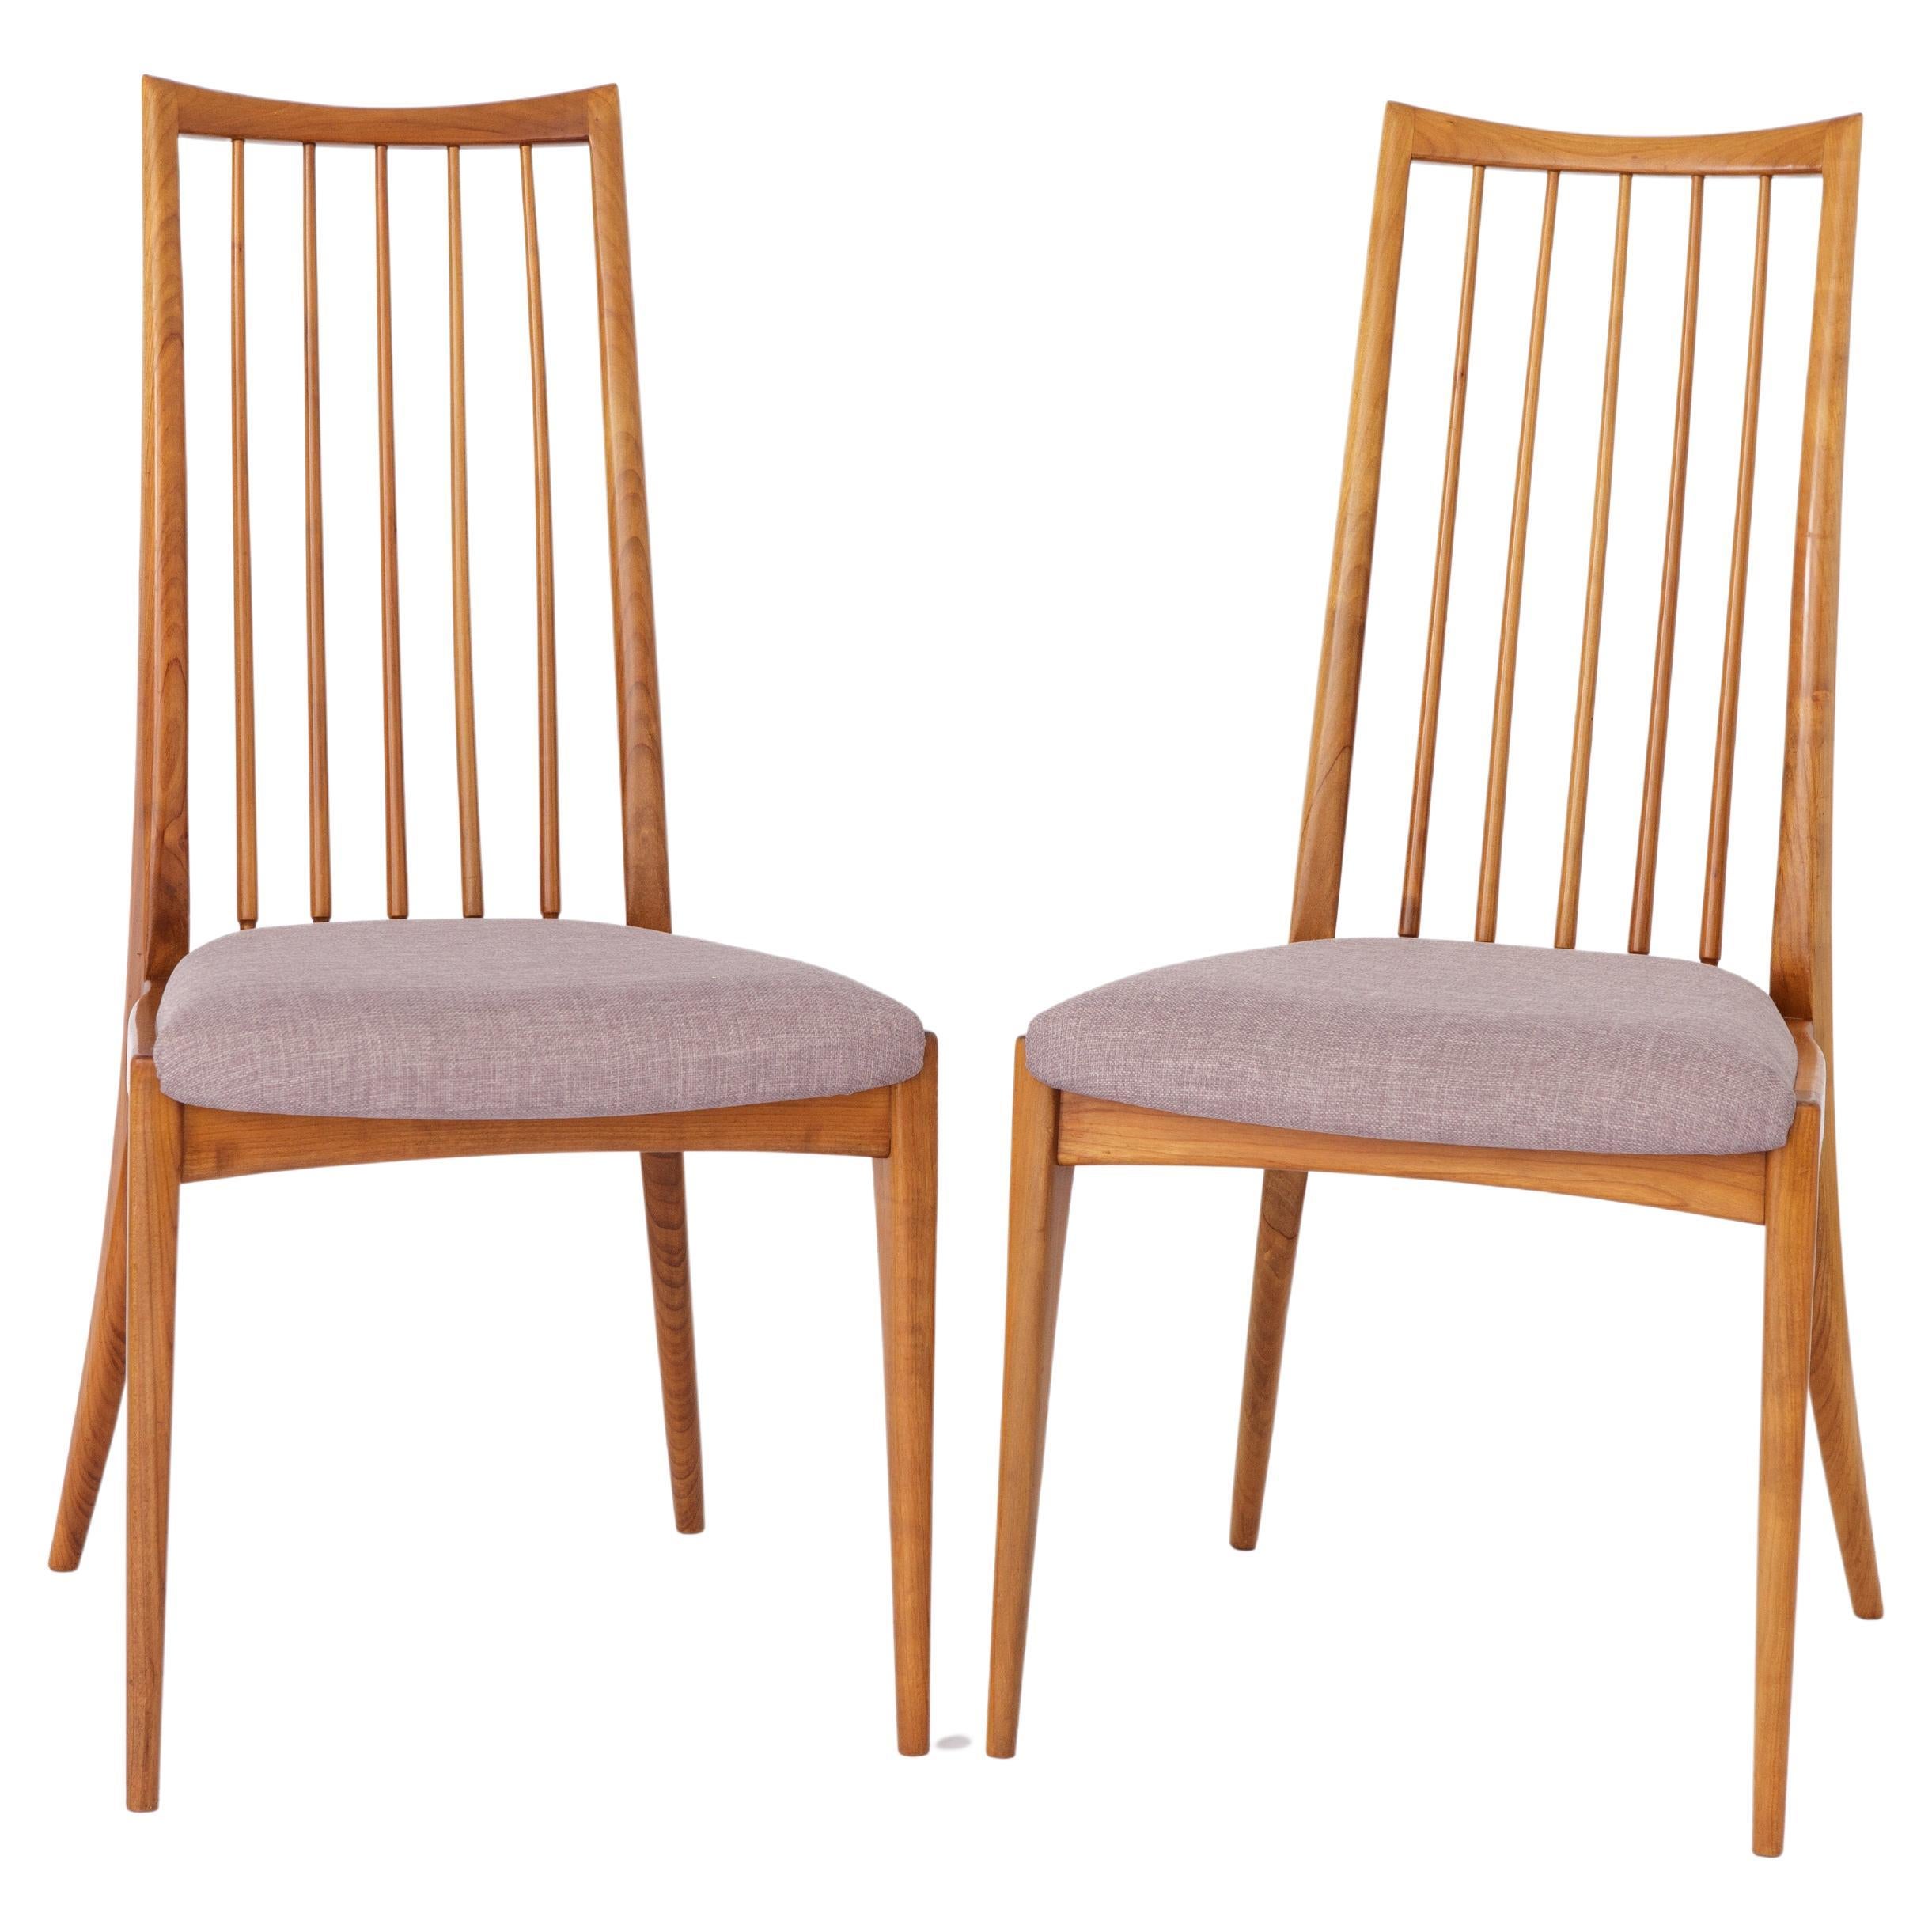 2 Vintage Chairs 1960s by Ernst Martin Dettinger, Germany